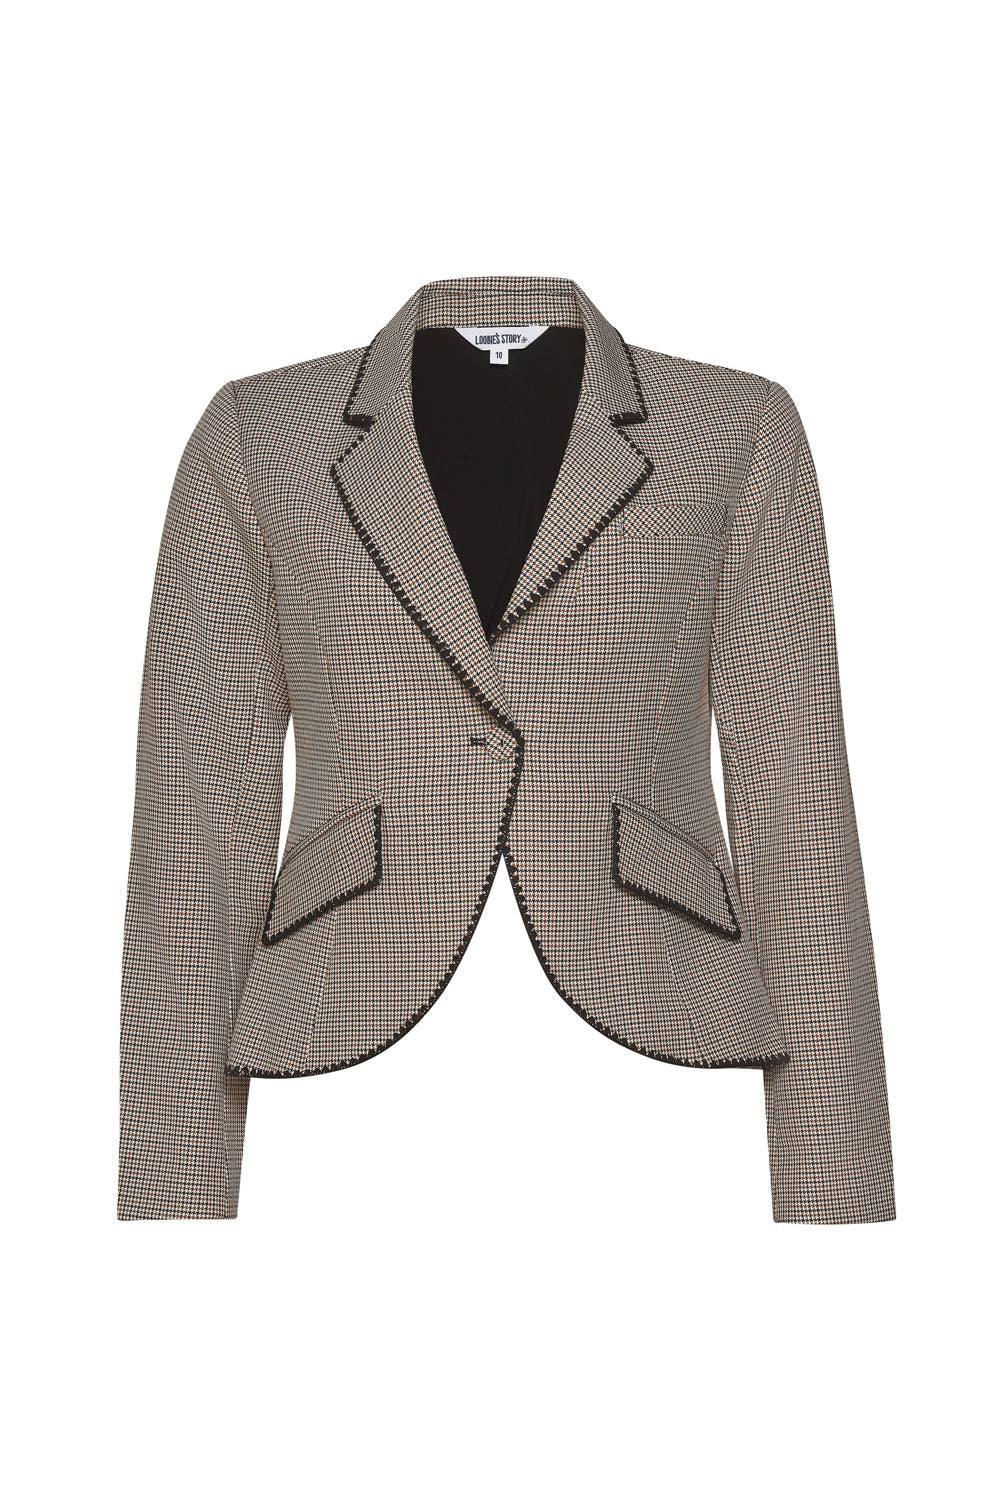 LOOBIE'S STORY AGATHA JACKET - TAN HOUNDSTOOTH - THE VOGUE STORE